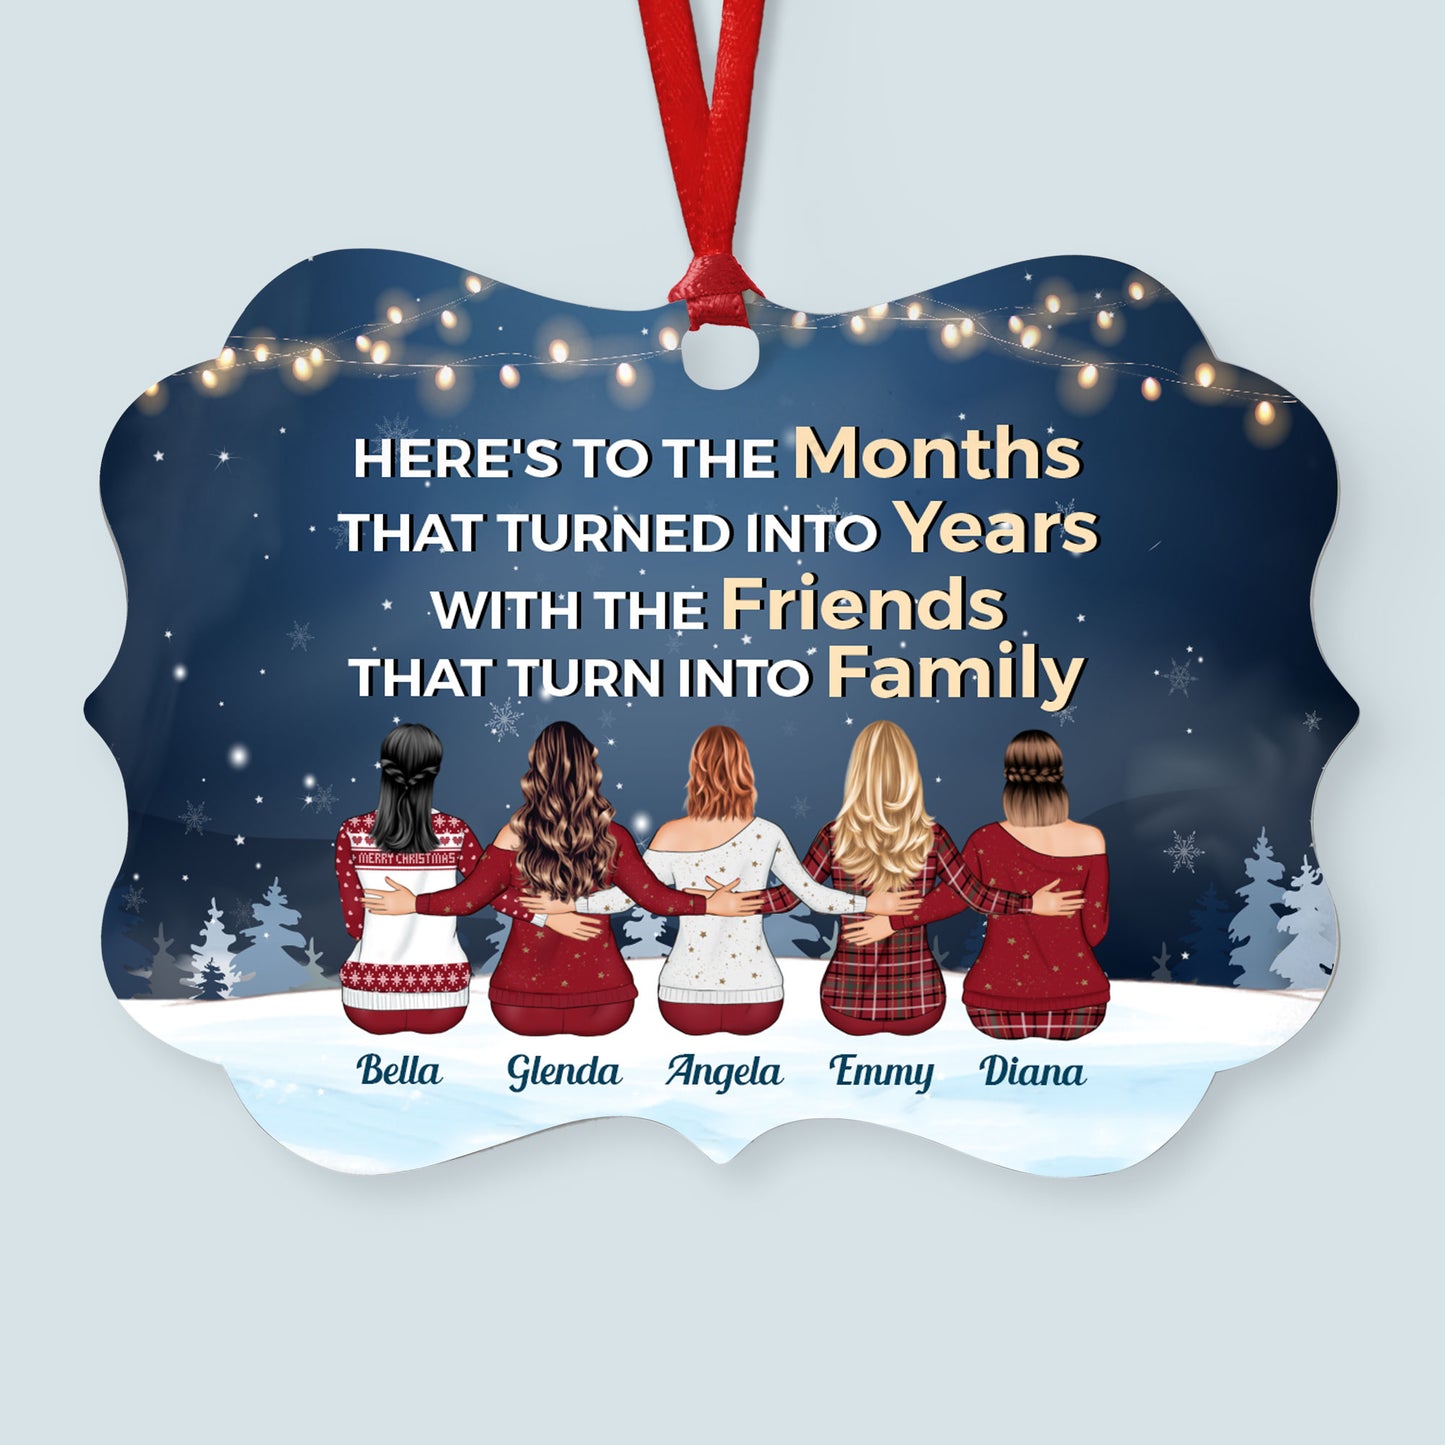 Here's To The Months That Turned Into Years - Personalized Aluminum Ornament - Christmas Gift For Friends, Besties, Co-Workers, BFF